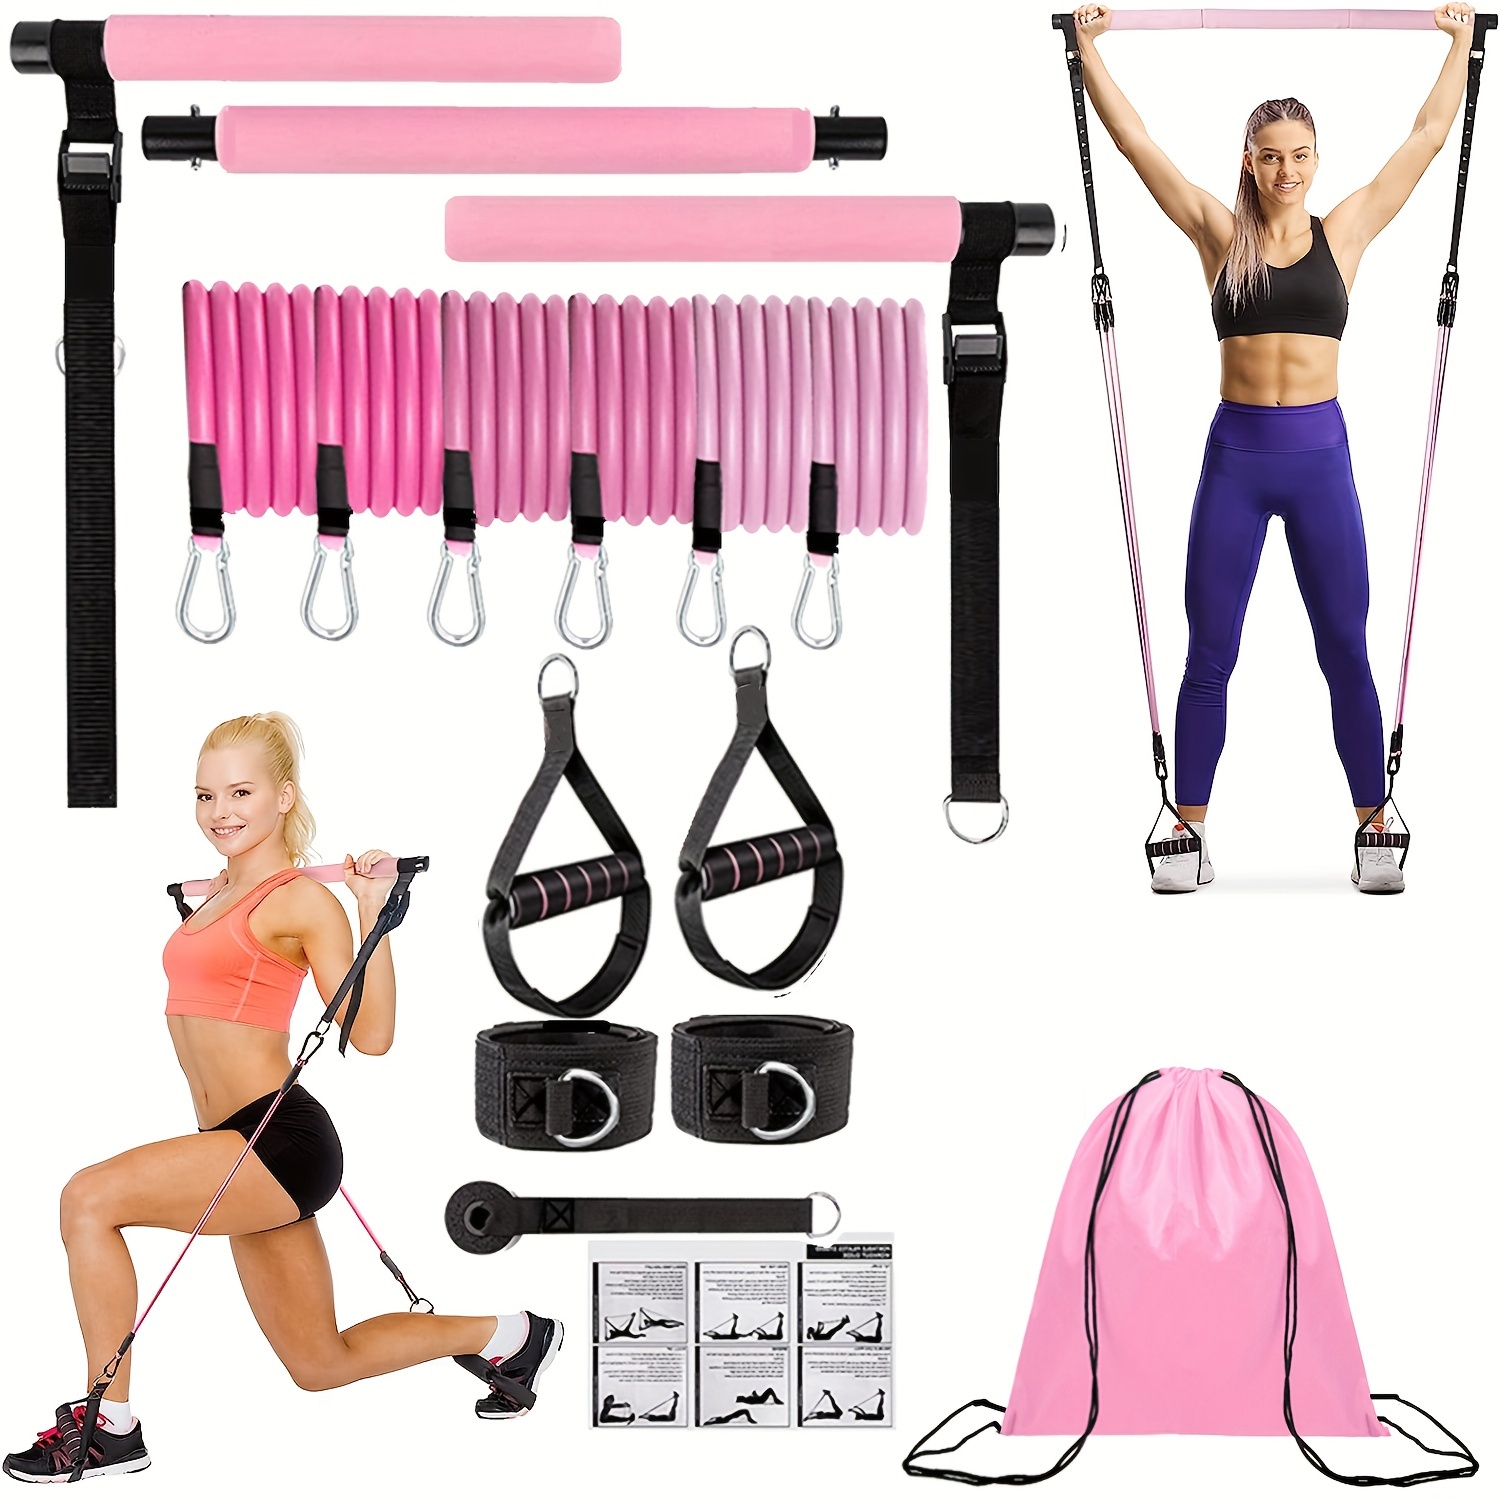 Pilates Bar Kit with Resistance Bands - Workout Equipment for Home Workouts  - Pilates Stick - Resistance Kit - Leg Workout Bands - Fitness Equipment